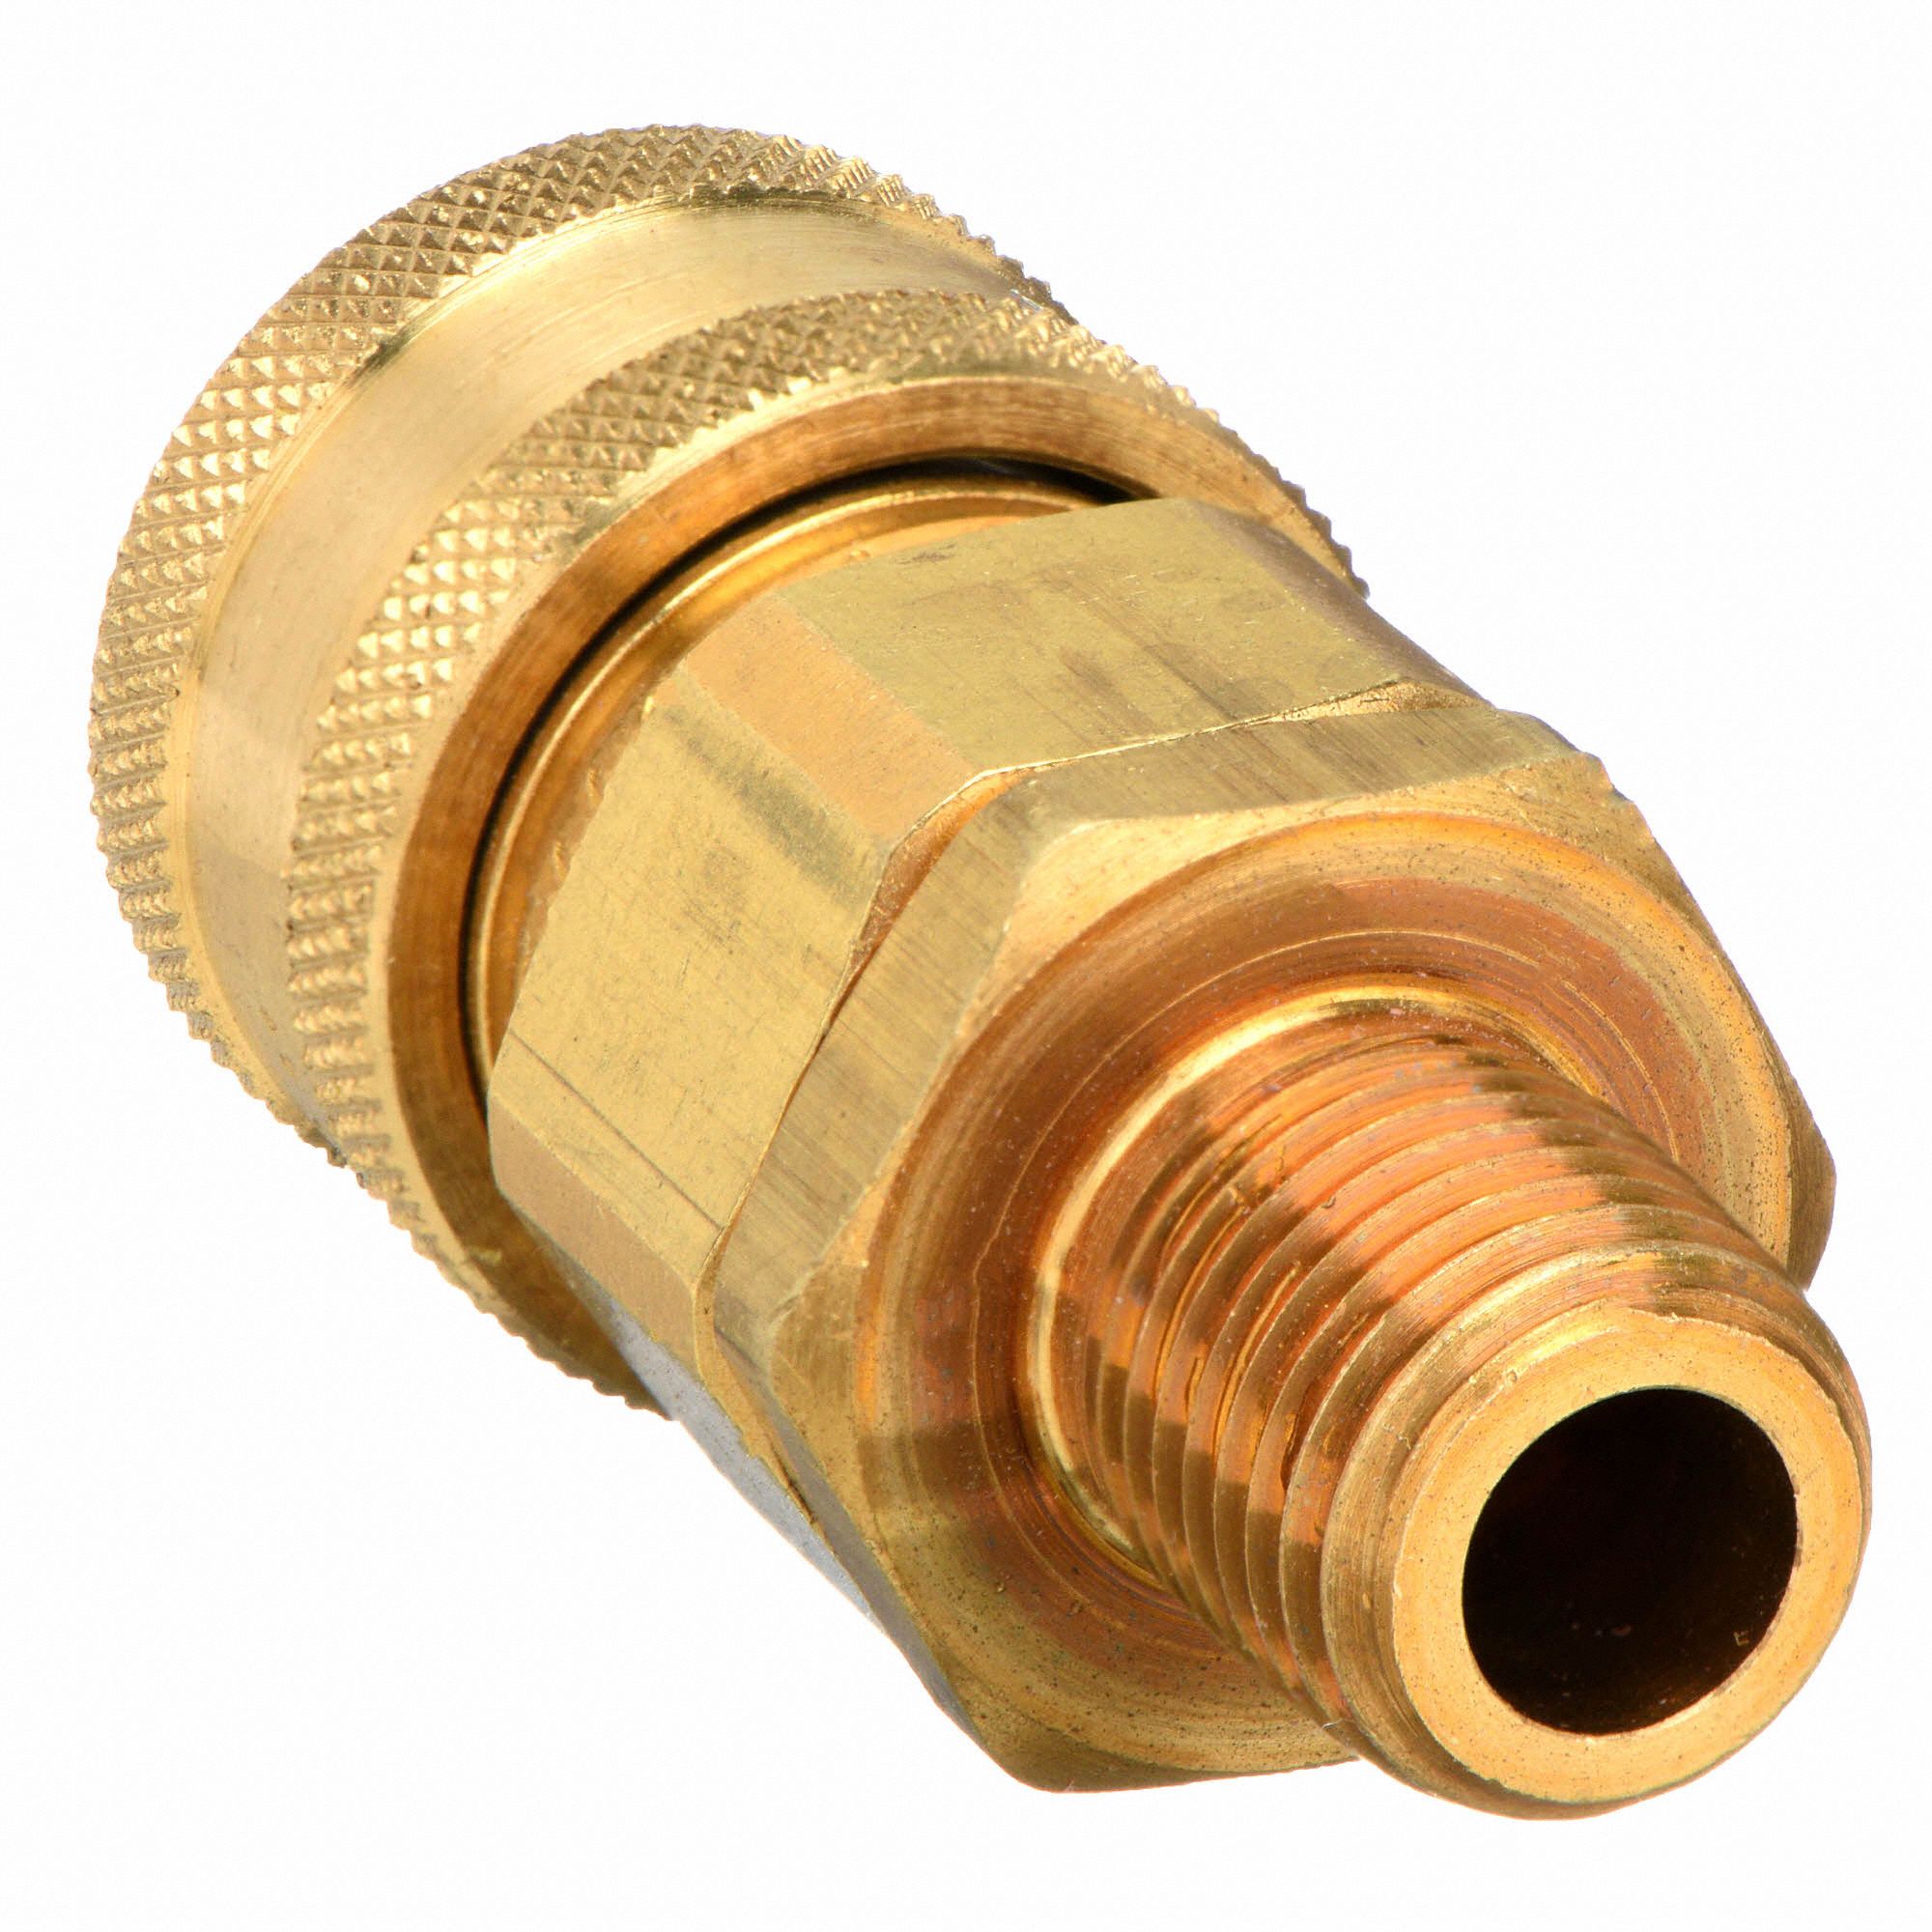 SNAP-TITE Hydraulic Quick Connect Hose Coupling: 1/4 in Coupling Size ...